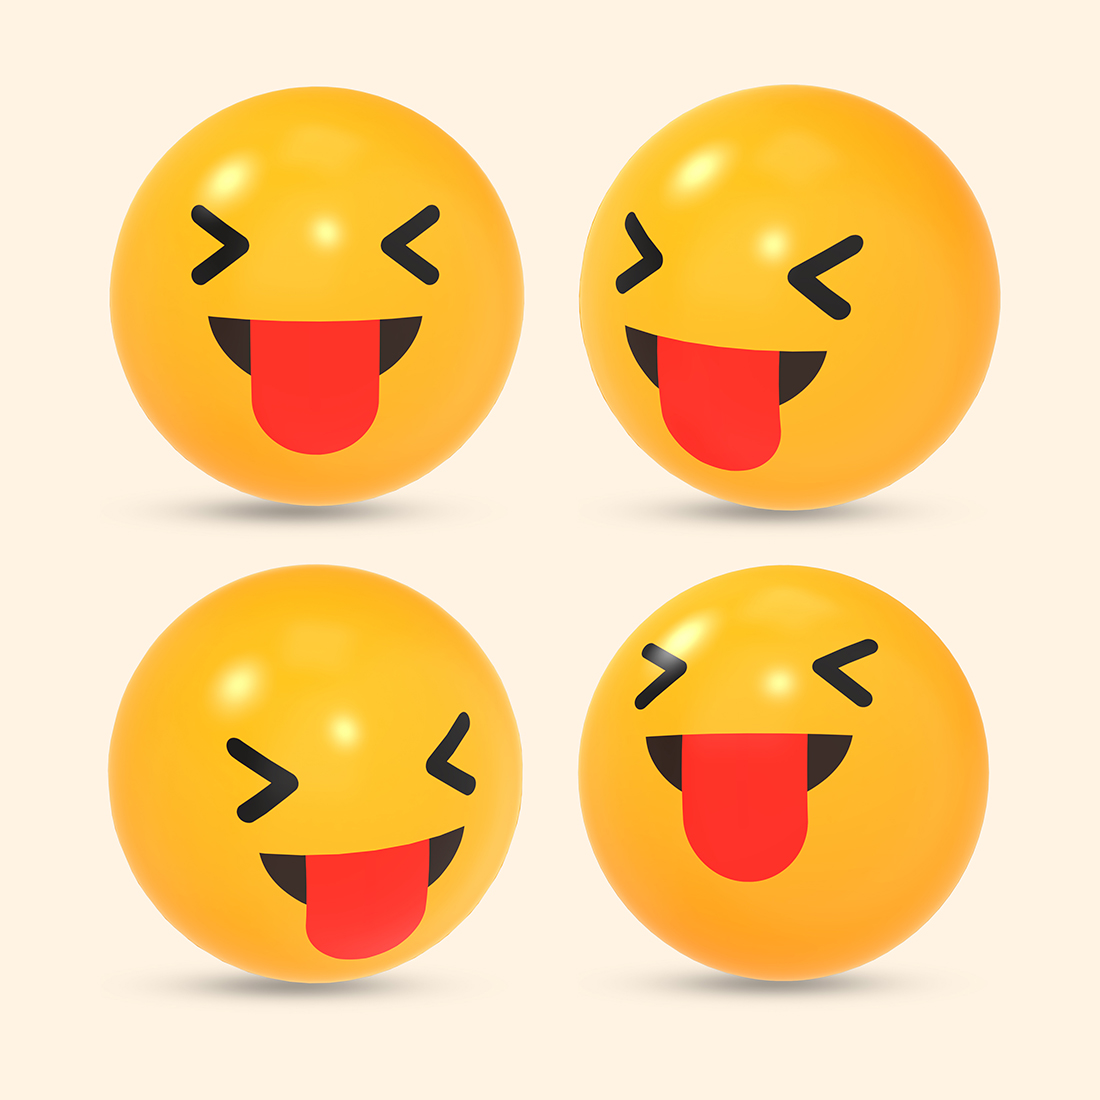 3D rendered social media icon of squinting Face with tongue out emoji reaction with different view preview image.